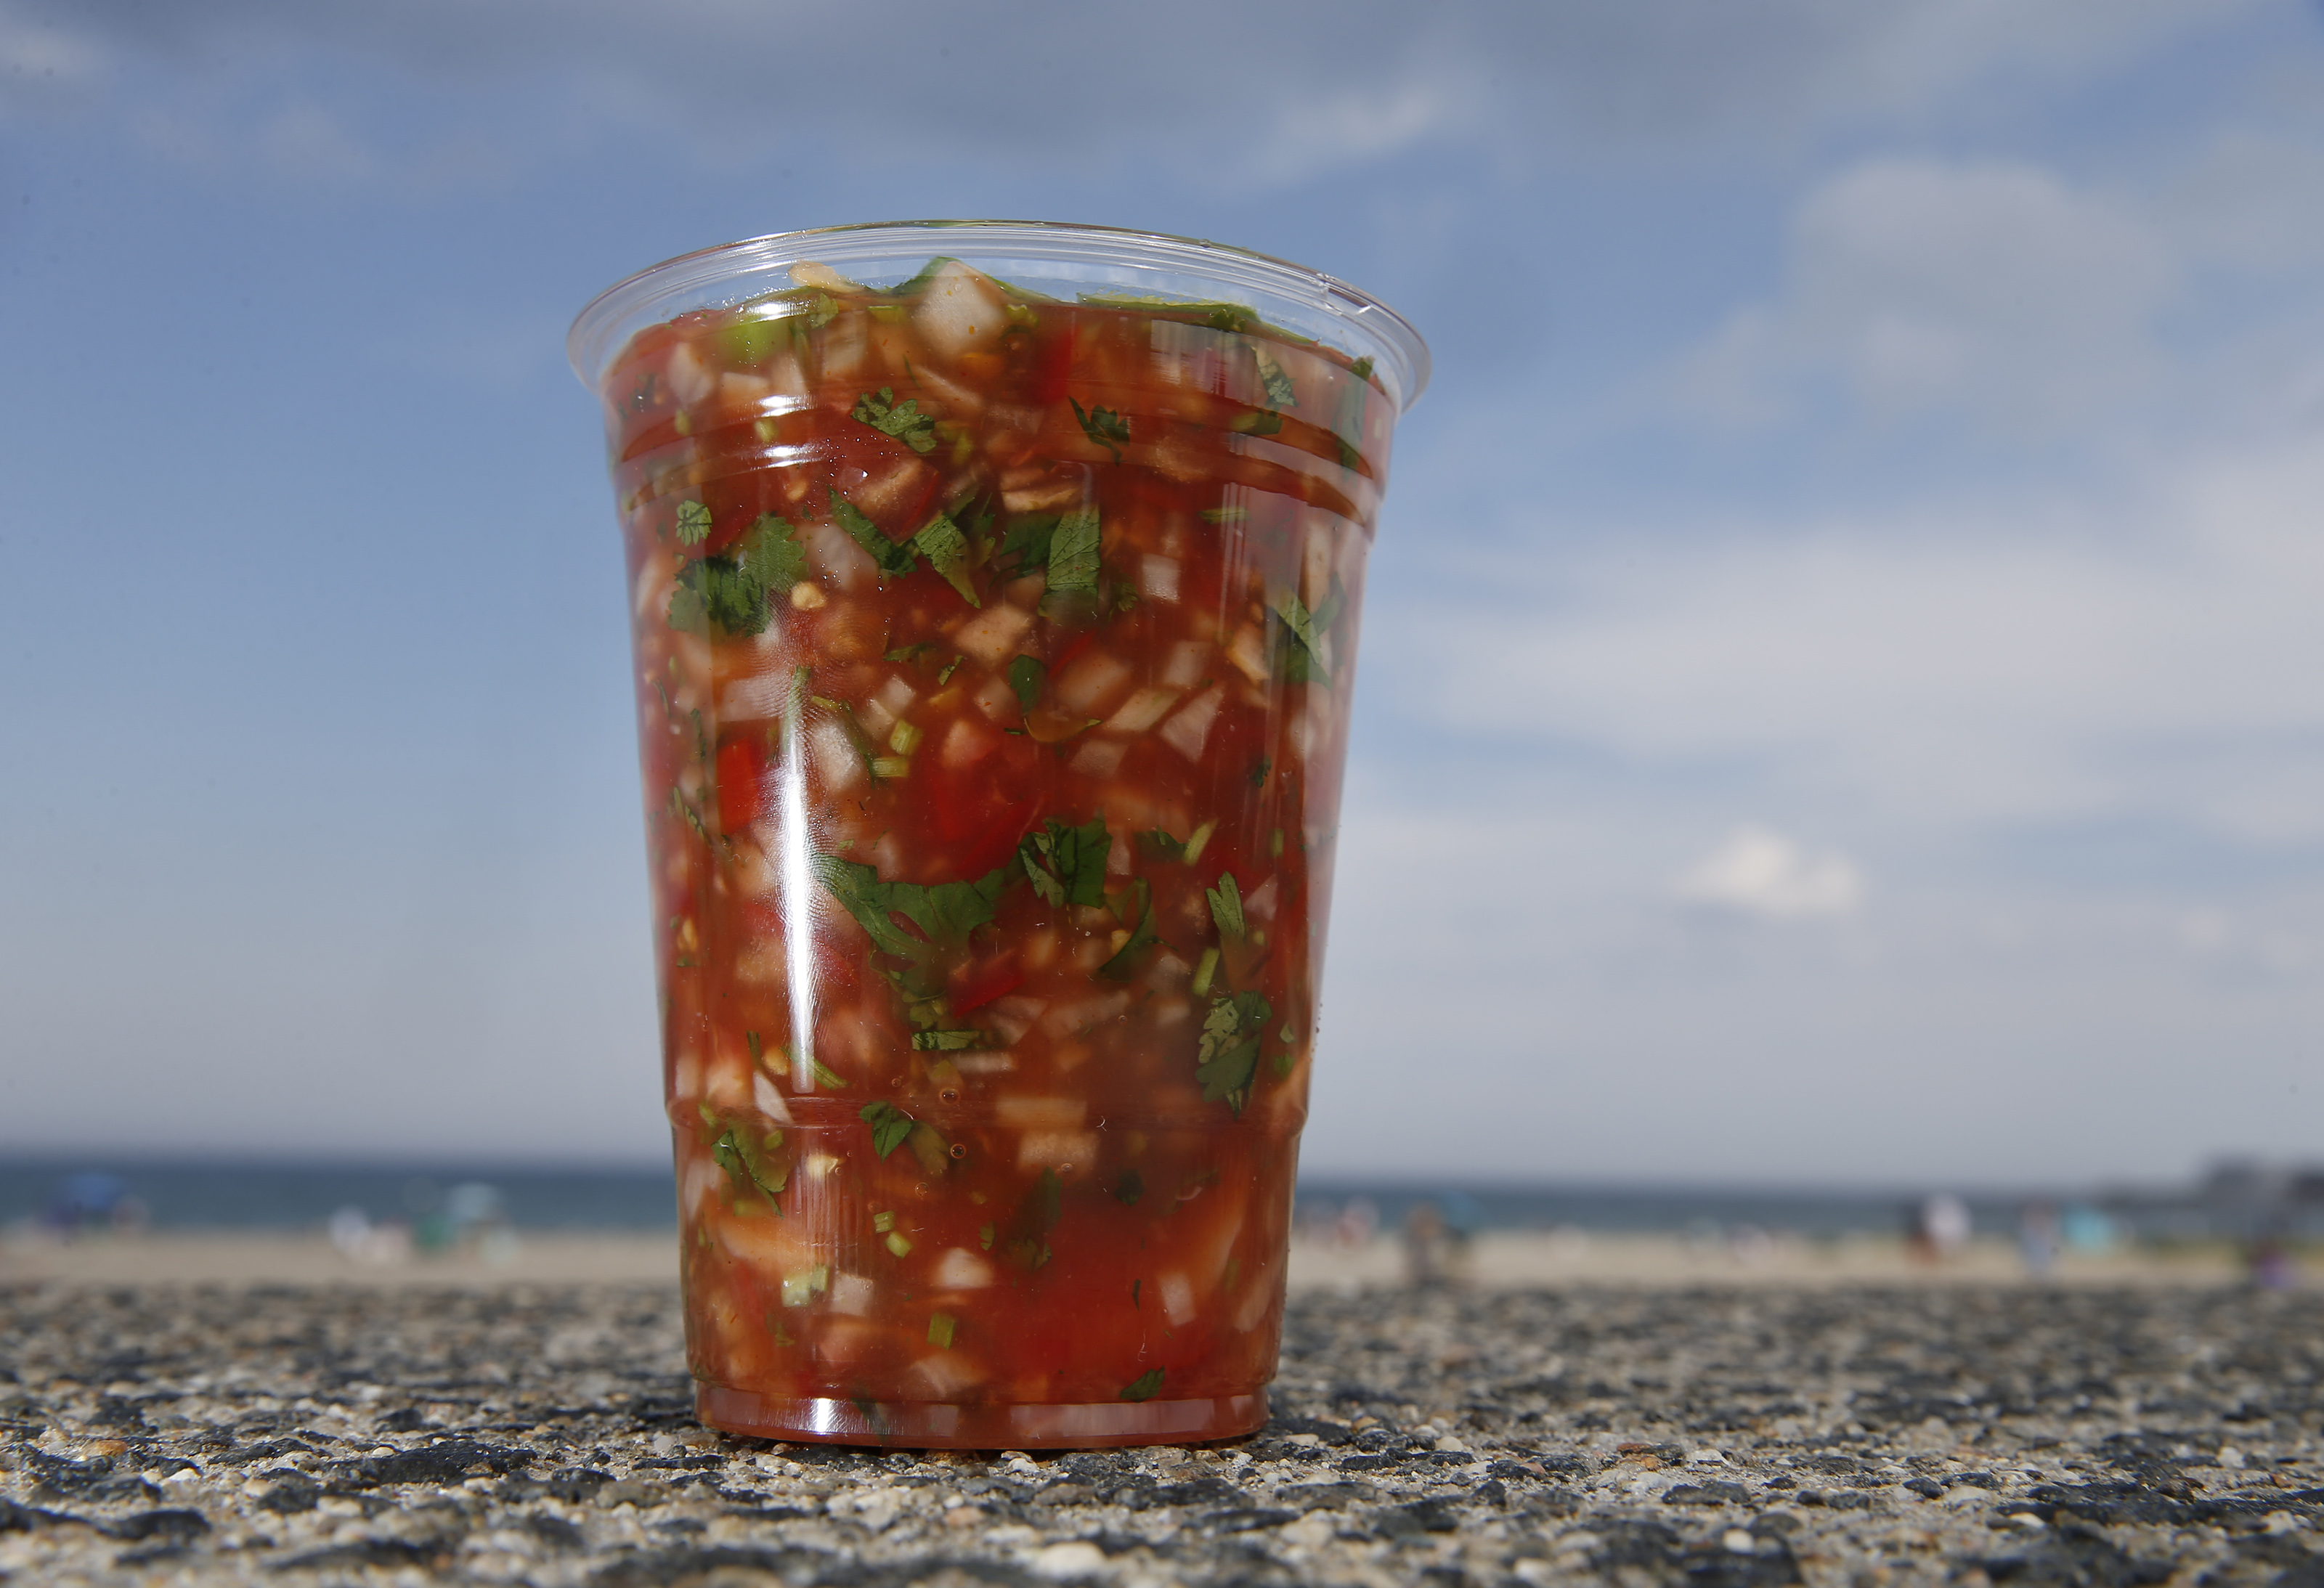 “Ceviche.” That’s what Jared Auerbach, owner and CEO of Red’s Best, a Boston seafood business, wants to eat all summer long. This is the shrimp ceviche from La Metapaneca Grill, a snack window across from Revere Beach. 


